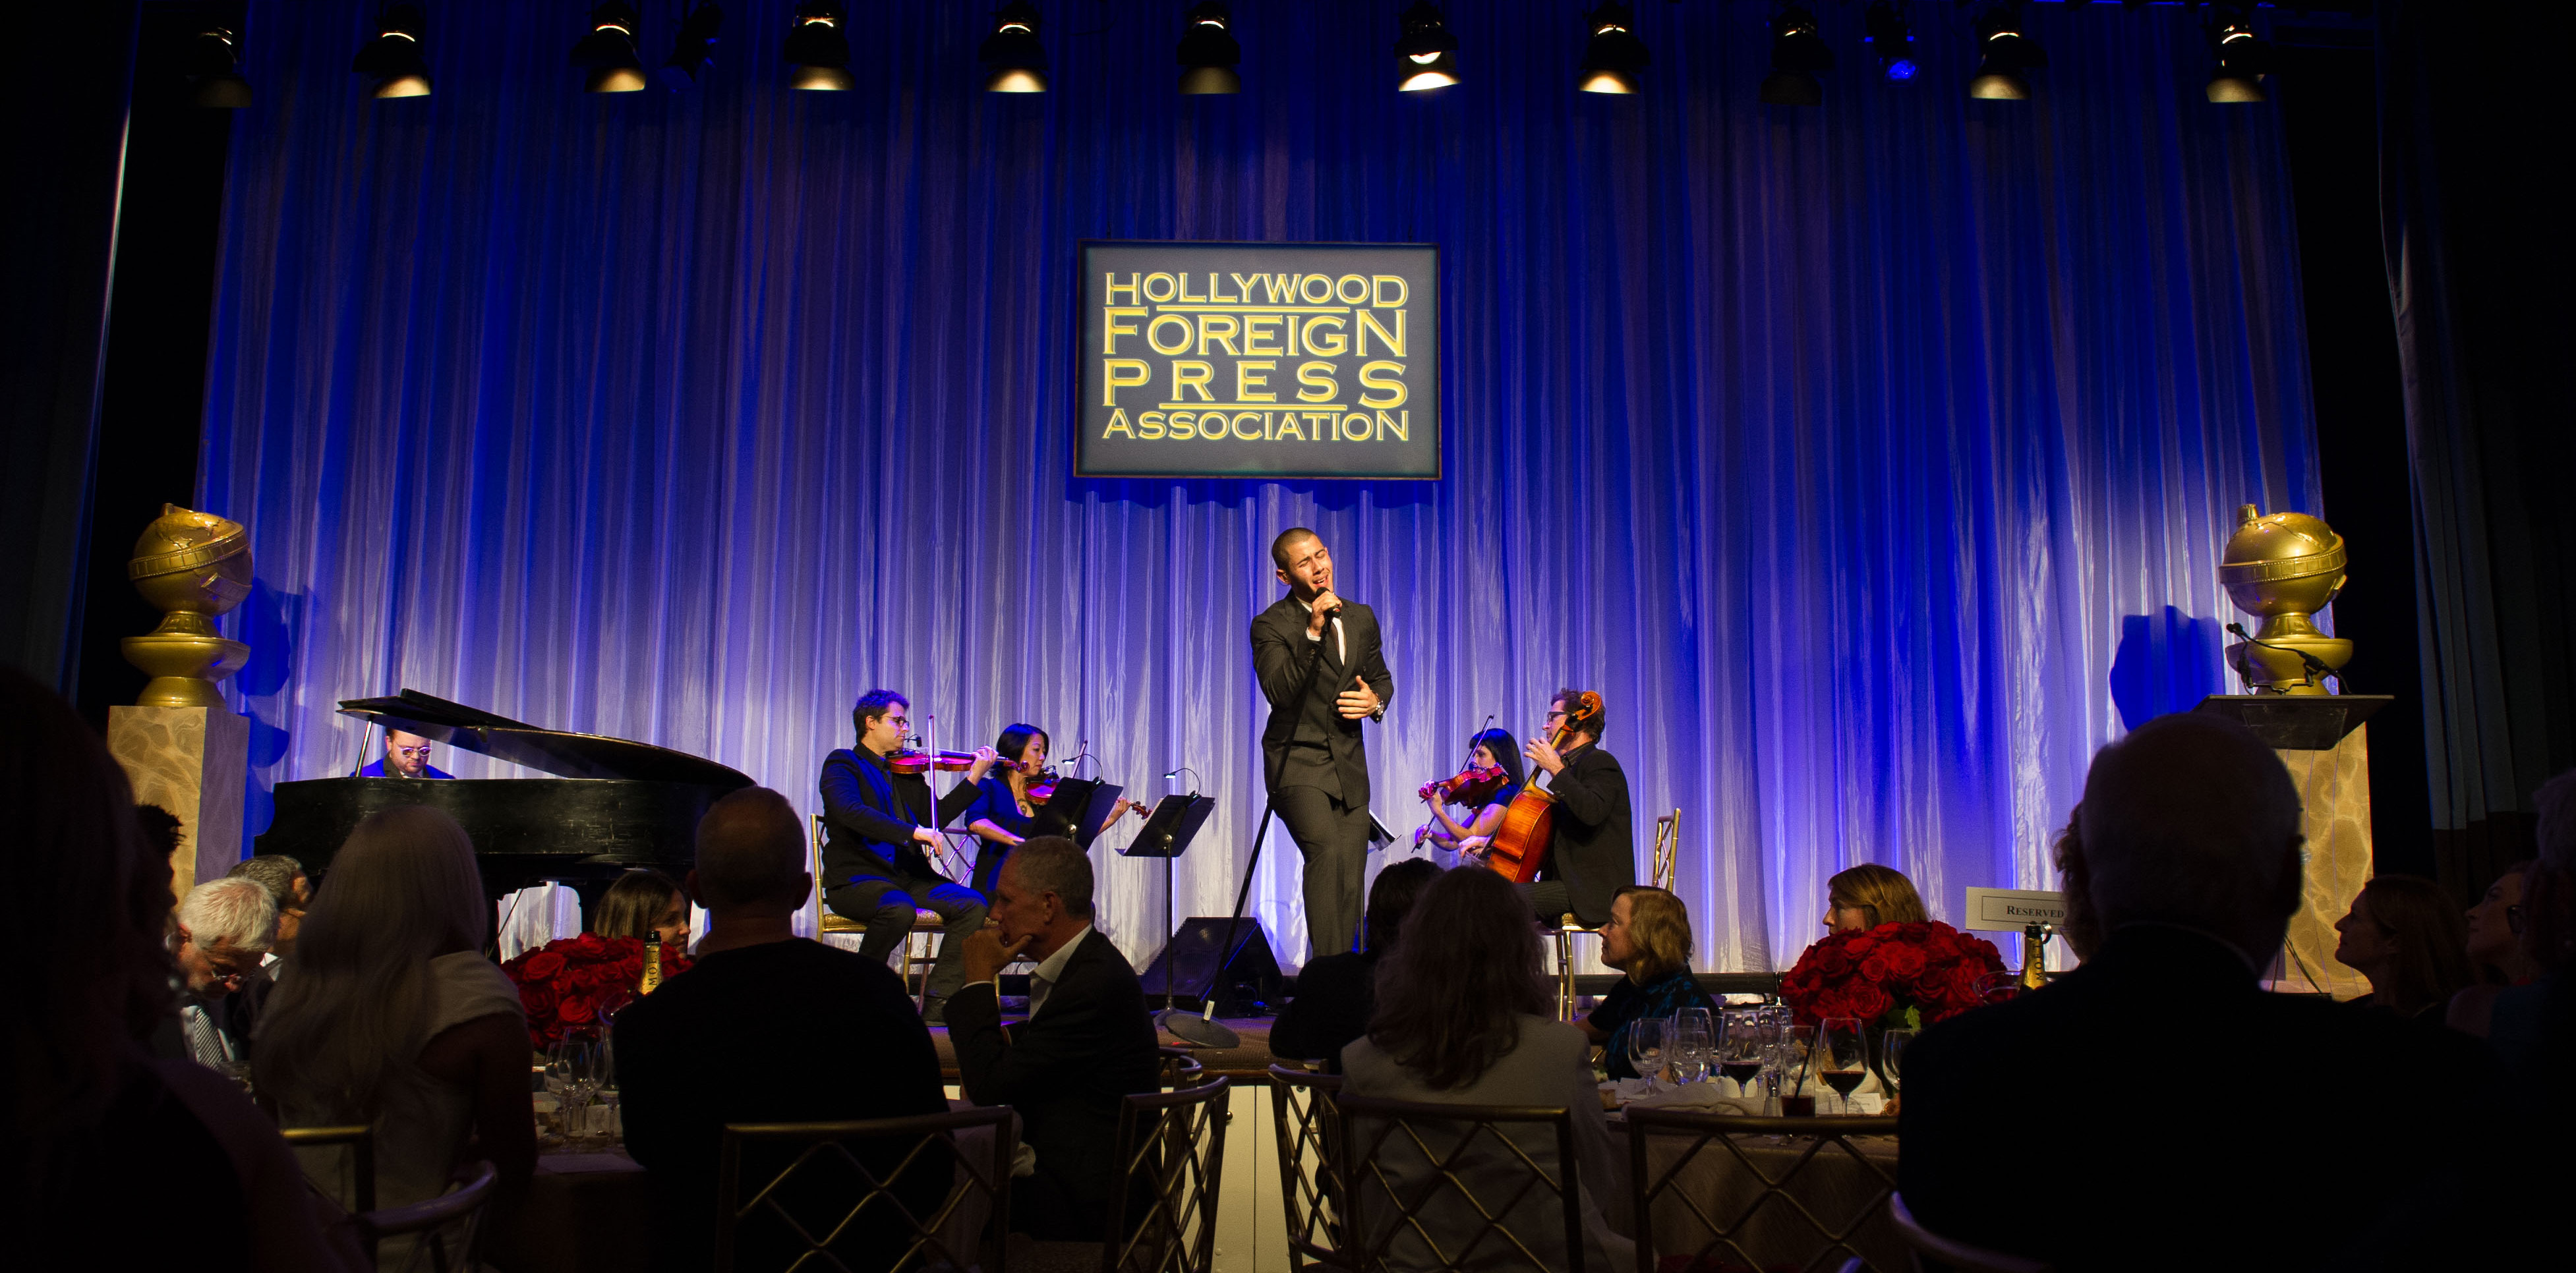 Beverly Hills, CA. August 13, 2015 Hollywood Foreign Press Association presents annual Grants Dinner Thursday night from the Beverly Wilshire Hotel.  The HFPA will present more than $2 million in donations to non-profit entertainment-related organizations and scholarship programs.  Pictured: Nick Jonas performing.